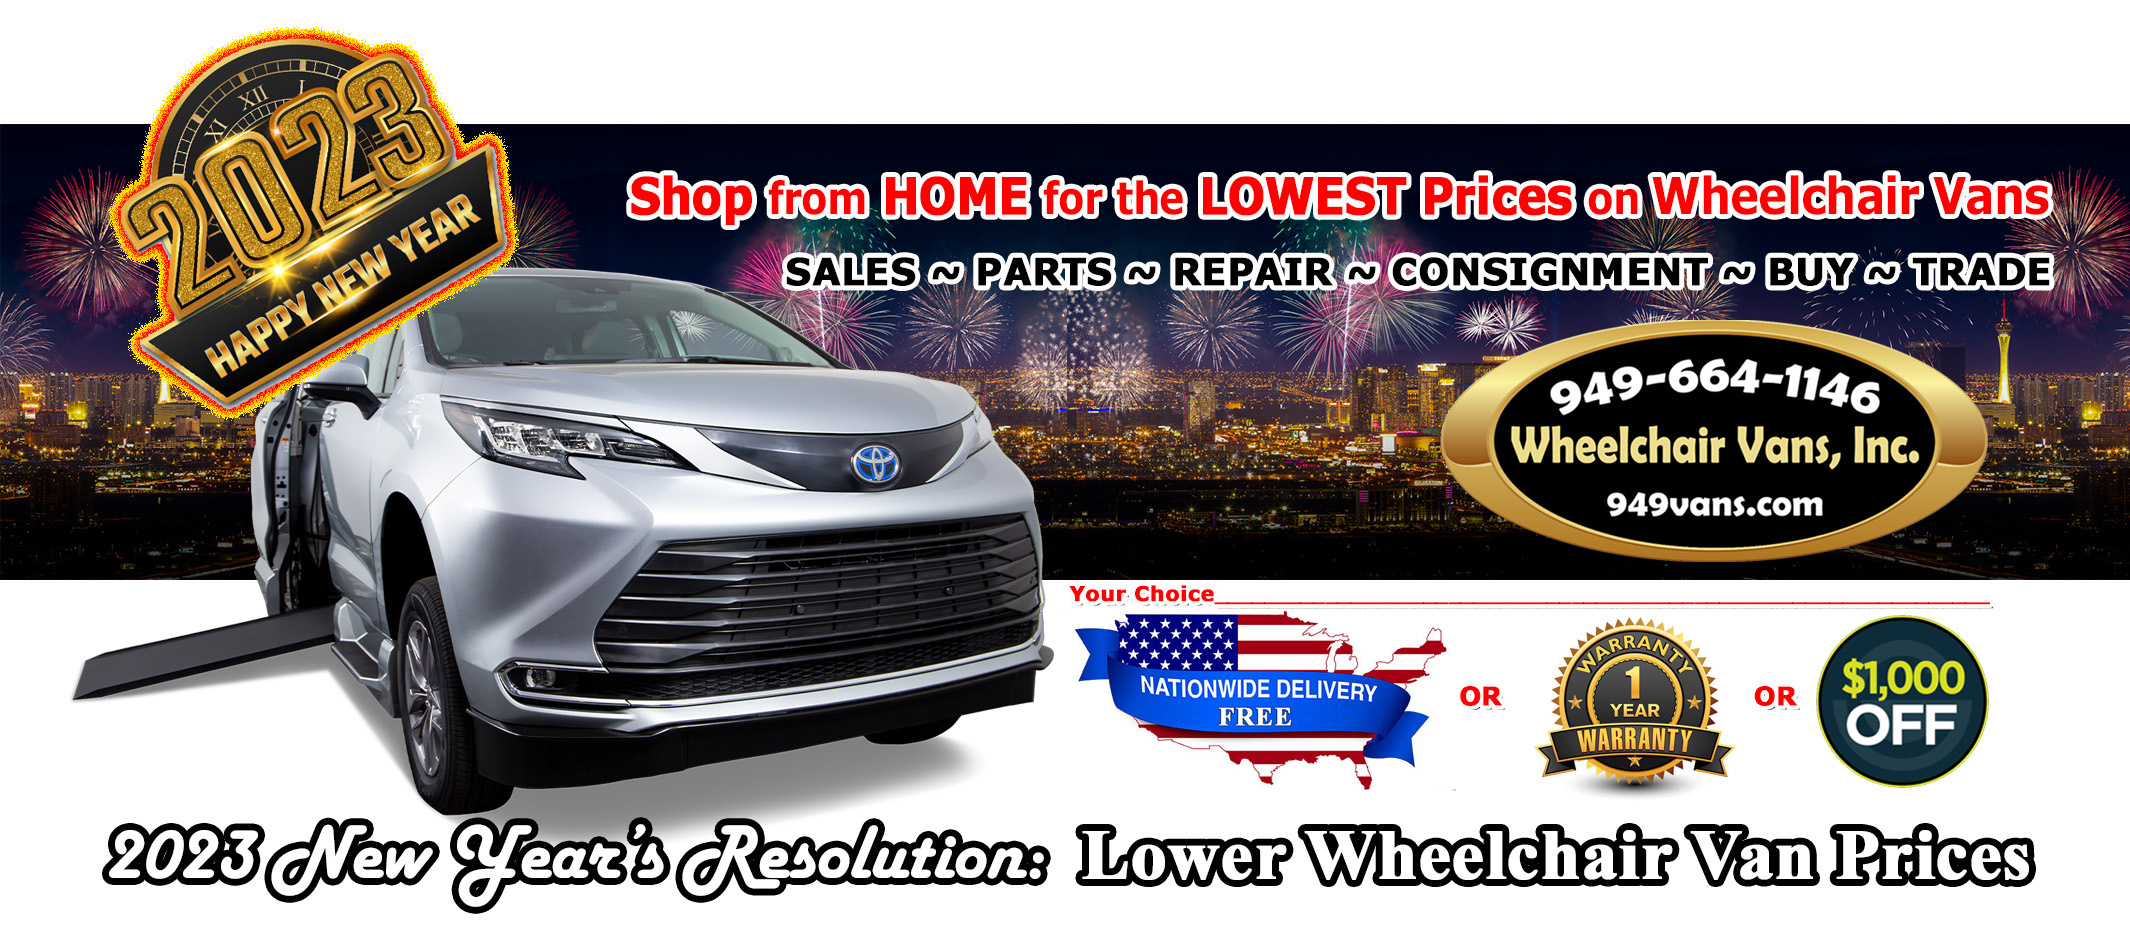 Our 2023 New Years Resolution is to offer even Lower Prices on Wheelchair Vans.  Shop from HOME for the LOWEST Prices on Wheelchair Vans  FREE Nationwide Shipping or  FREE up to 3 year/36,000 mile Bumper to Bumper Warranty* or  $1,000 OFF all Wheelchair Vans in stock  ~ Online Video Demos ~ Apply Online Financing ~ No Salvage or Rebuilt Title Wheelchair Vans ~ No "Call for Price" game  ~ WVI Inspected : 240 Points ~ Sanitized & Delivered to Your Doorstep ~ We Will Beat ANY VMI or BraunAbility Wheelchair Van Dealer's Pricing.*  We SELL for LESS then the Factory Direct Stores, this is why we DARE you to compare ! Show us any genuine competitors* price we will beat it - its that easy.  !!  We all of our wheelchair vans are inspected, refurbished, detailed and sanitized prior to delivery. The only thing you will need is your first oil change in the future.  We Specialize in: SALES, REPAIRS, PARTS, CONSIGNMENT, BUY & TRADE  Why buy from us? - There are NO BOGUS Fees. NO NMEDA fee, NO QAP fee, NO BraunAbility fee nor do we follow the VMI MAP (Minimum Advertised Price) policy. (Please call 949-664-1146 for details)  We don't play the "CALL FOR PRICE" game where the prices of the vans changes with every customer or salesperson, especially when you are a VA, Regional Center, or another type Grant recipient. (Please call 949-664-1146 for details)  We offer Wholesale Pricing to the Public on Wheelchair Vans. Whether you're looking for a side entry wheelchair van or a rear entry handicap accessible van chances are you'll find the right wheelchair van here at www.949vans.com at the BEST PRICES. We SELL for LESS than the Factory Direct Stores.  RELAX ! ... LET US Do the Shopping - Try our Wheelchair Van Finder - Tell us what you are looking for. We will shop the competition for you. We will present your dream wheelchair with their prices along with ours side by side. We will provide you up to 3 comparable vehicles at the competitor locations.  for more info visit: http://www.949vans.com/wheelchair-accessible-van-finder-service.aspx  Buy with Confidence: We DO NOT SELL Wheelchair Accessible Vehicles that have a SALVAGE or REBUILT TITLE. Thinking of buying a Salvaged or Rebuilt Title Wheelchair Van ? for more info visit: http://www.949vans.com/thinking-of-buying-a-salvaged-or-rebuilt-title-wheelchair-van.aspx  Do you have a TRADE IN VEHICLE ? - Not a problem, We accept almost ANYTHING for TRADE IN.  We BUY Wheelchair Vans - Sell us your Wheelchair Van. It's a free, no obligation and quick process that will ensure you getting top dollar for your wheelchair van. It's as easy as 1, 2, 3! ... for more info visit: http://www.949vans.com/we-buy-wheelchair-vans.aspx  Need the Maximum Amount of Money for your Wheelchair Van ? - We can HELP SELL your wheelchair van through our Wheelchair Van Consignment Program. for more info visit: http://www.949vans.com/wheelchairaccessible-vehicle-consignment-program-california.aspx  prices are plus government fees and taxes, financing charges, any dealer document processing charge, shipping, and any emissions test. Customer must qualify for all manufacture's rebates  *APR = Annual Percentage Rate. Annual percentage rates (APR) listed are "as low as" based on credit score and term, and are subject to approval.  #949vans #forsale #used #affordable #wheelchairvans #van  #toyota #sienna #hybrid #honda #odyssey #chrysler #pacifica #voyager #dodge #grand #caravan  #transporation  #invacare #commerical  #mobility #goldentech #ramp #wheelchair #wheelchairlife #braunability #permobil  #nemt #pridemobility #handicap #2023 #happy #newyear